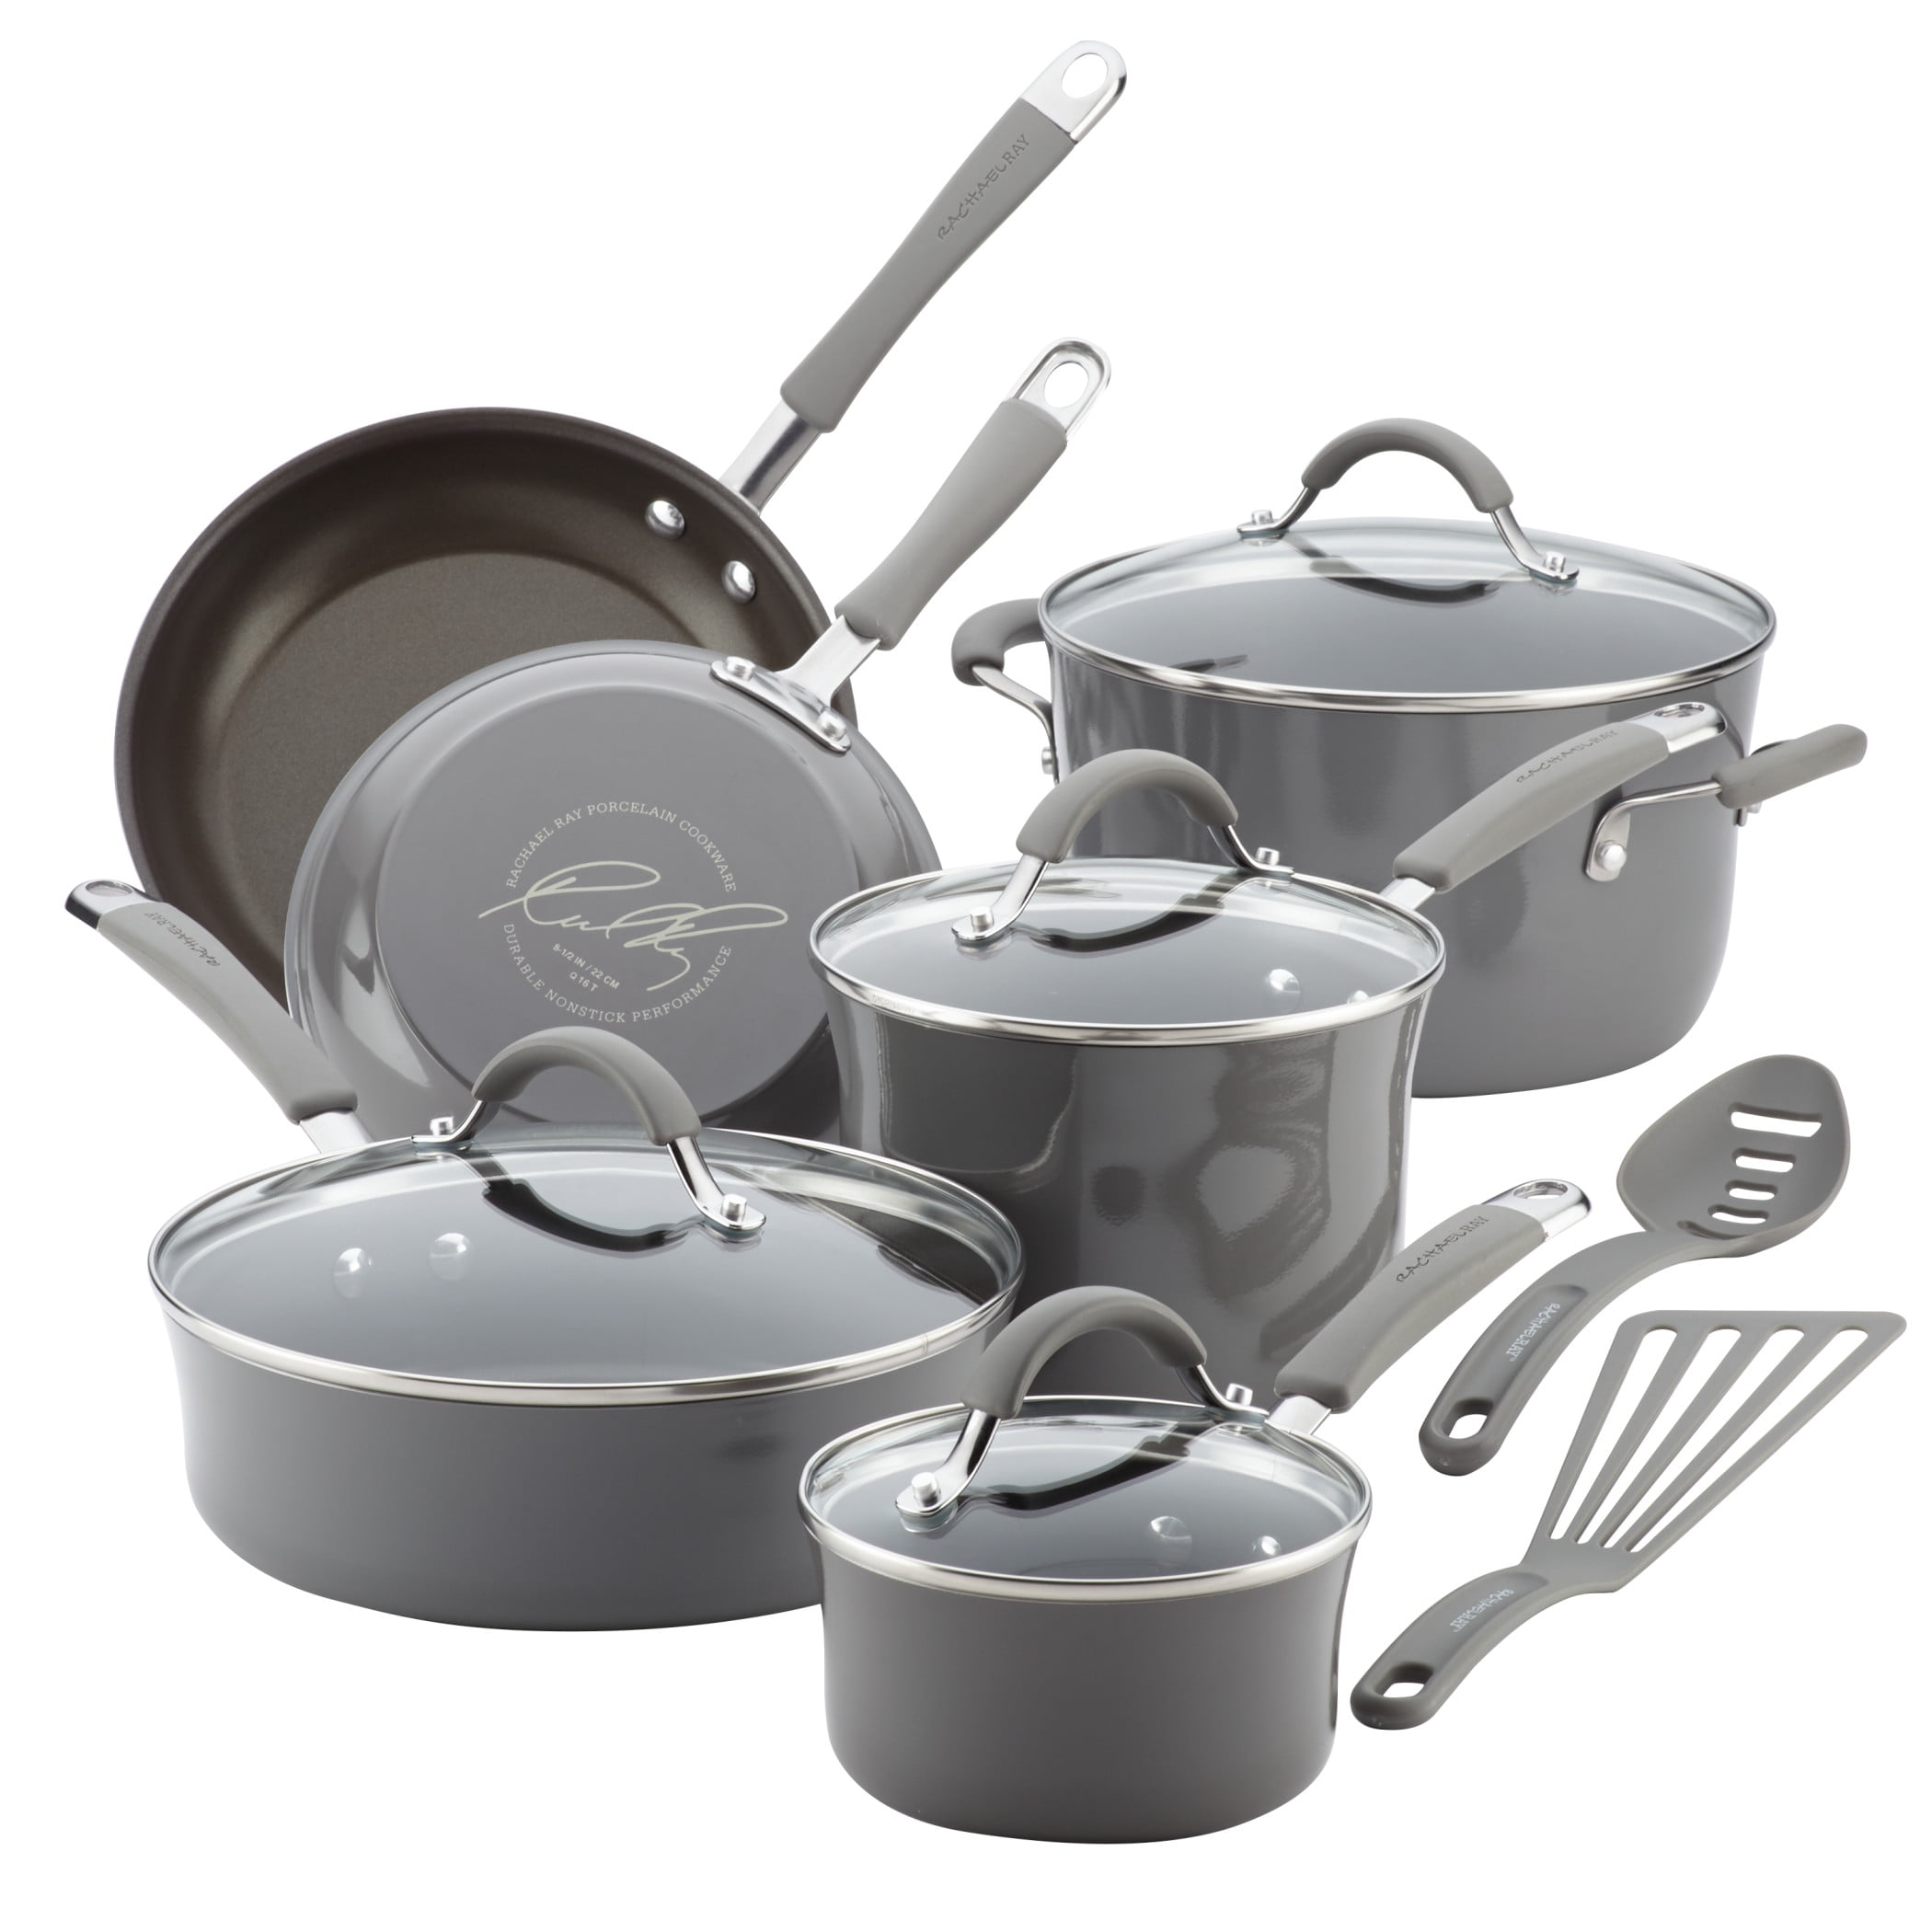 LOCHAS 13 Piece Pots And Pans Set - Safe Nonstick Kitchen Cookware With  Removable Handle, RV Cookware Set, Oven Safe (Cream)